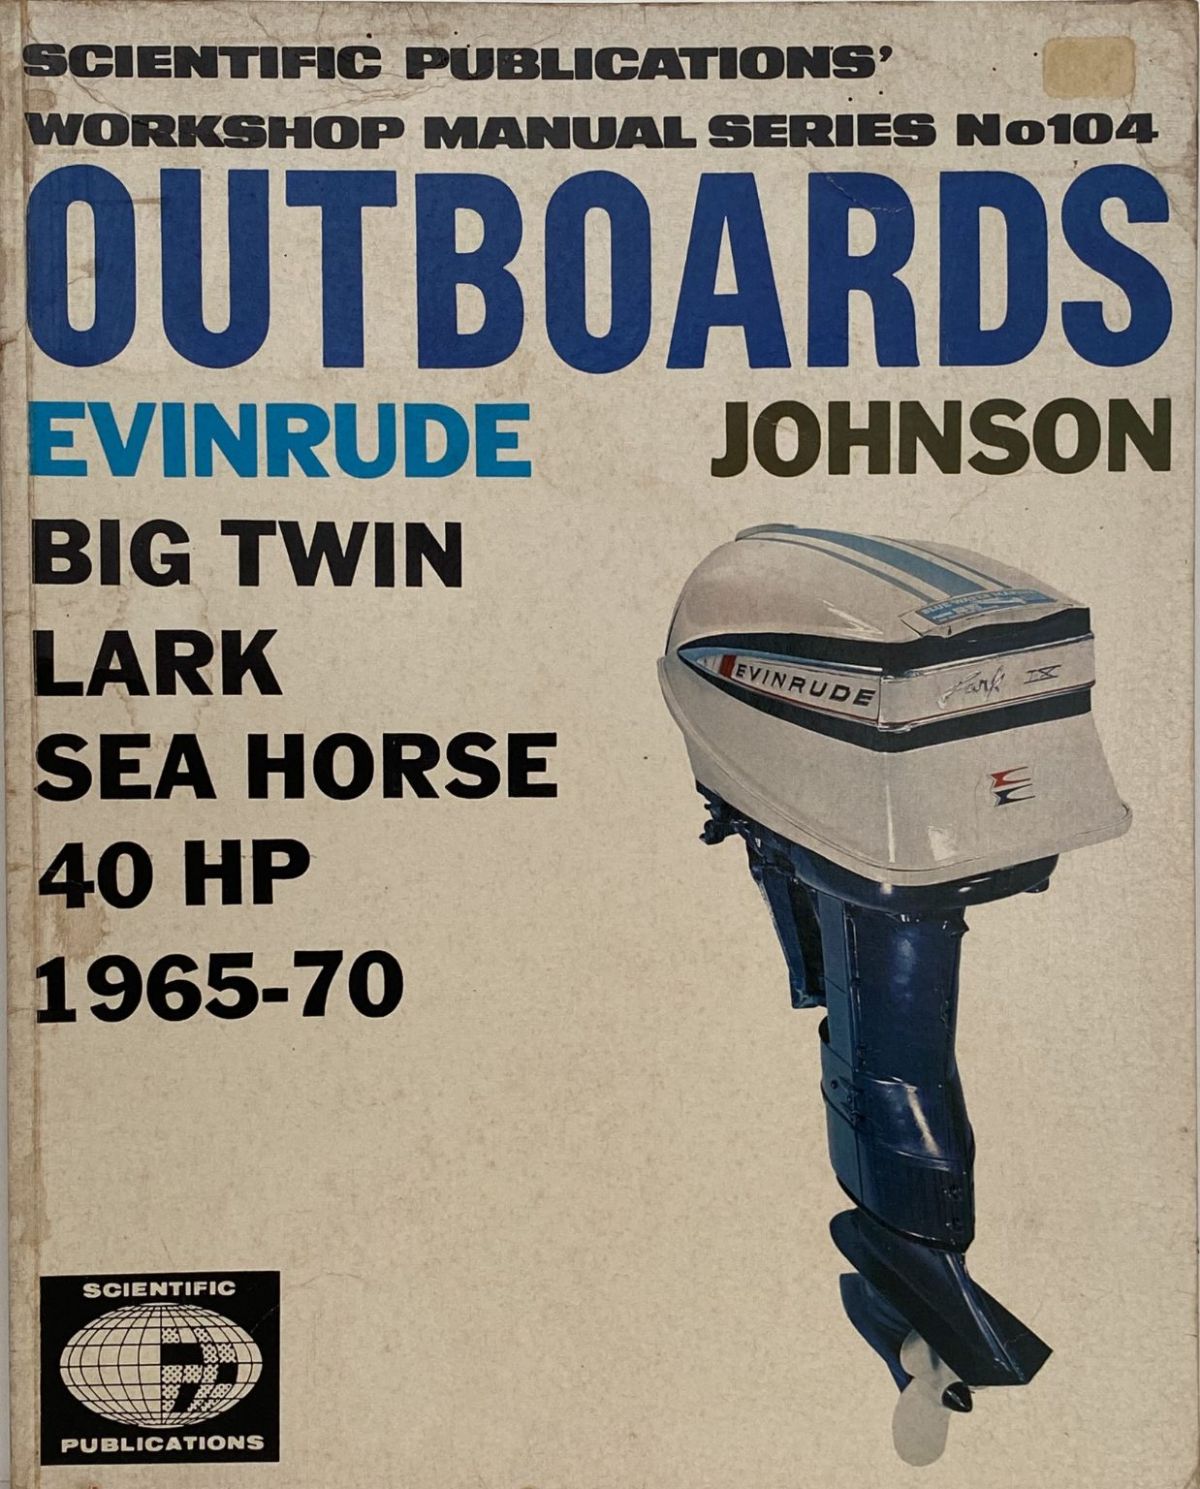 EVINRUDE / JOHNSON OUTBOARD Repair and Tune up Guide 1965 - 1970